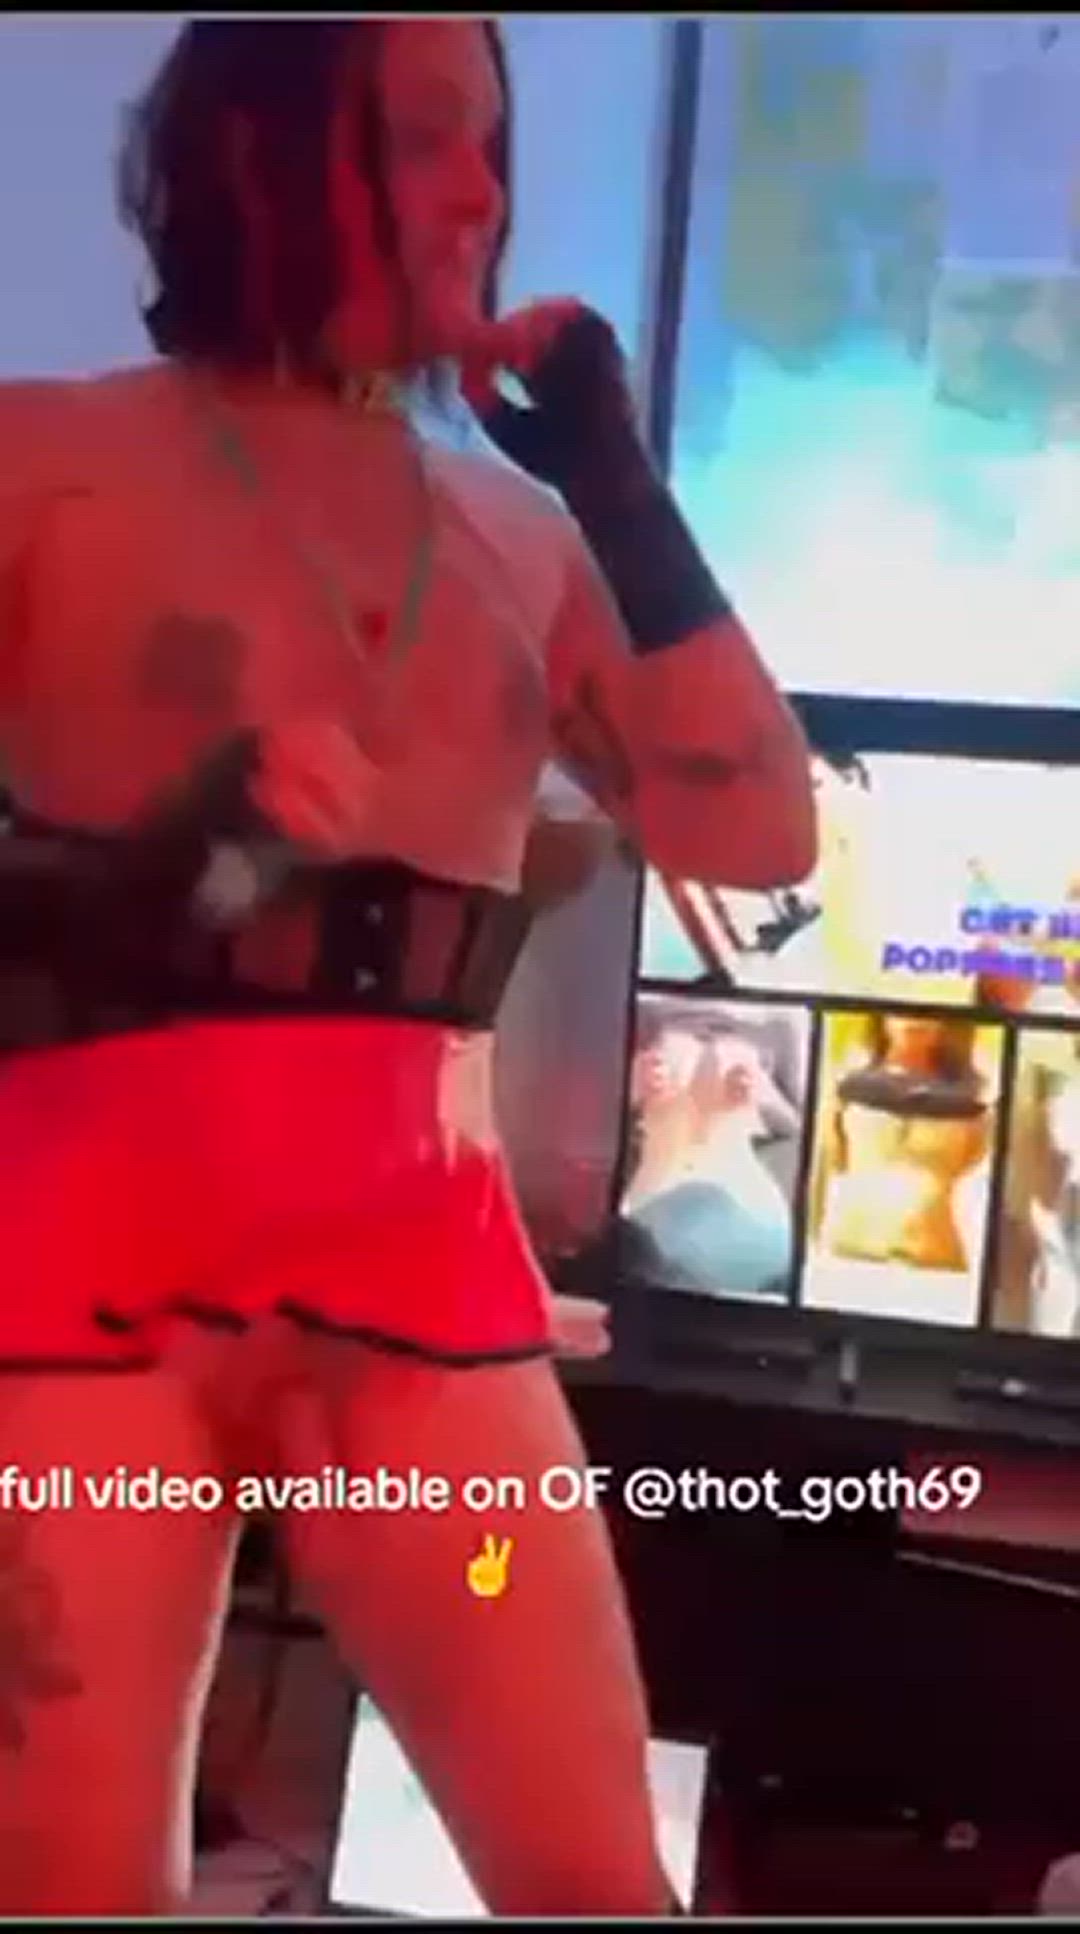 Tits porn video with onlyfans model nekoethot <strong>@thotgoth69</strong>